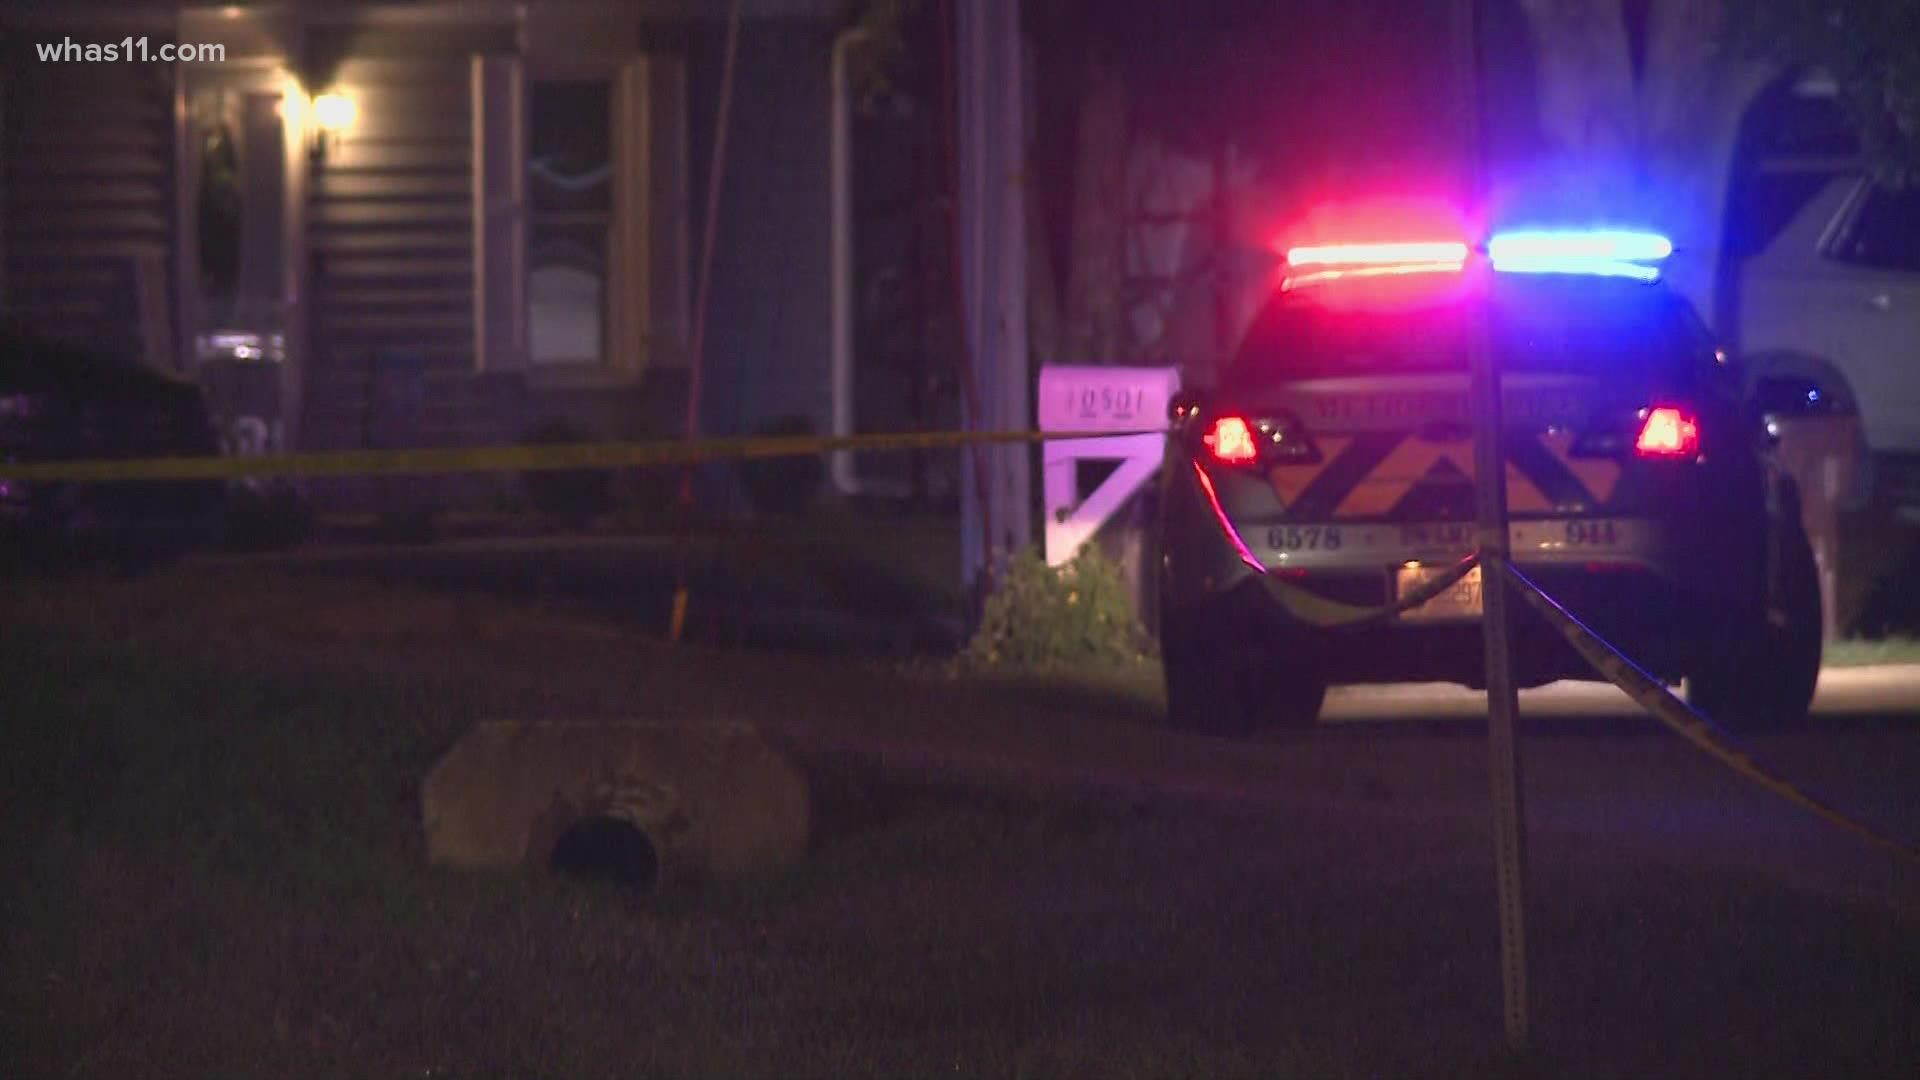 Louisville Metro Police said a woman was killed and a man was injured in a shooting around 12:45 a.m. Friday.